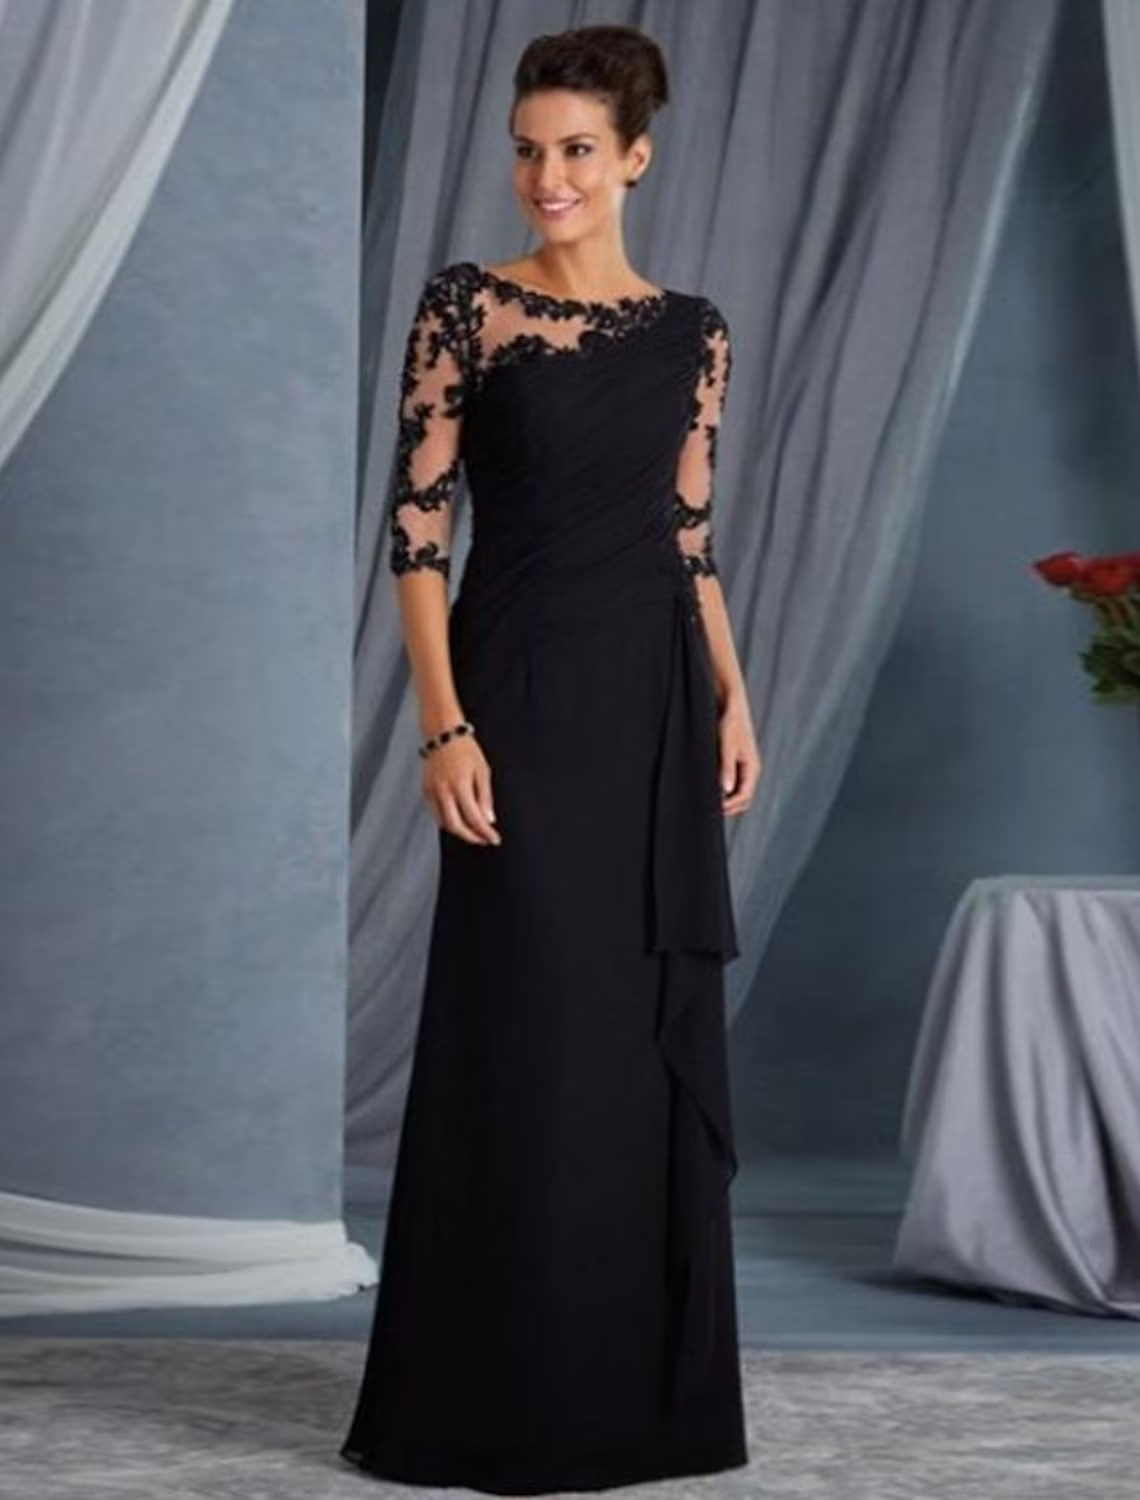 Evening Gown Elegant Dress Wedding Guest Floor Length Half Sleeve Lace with Appliques